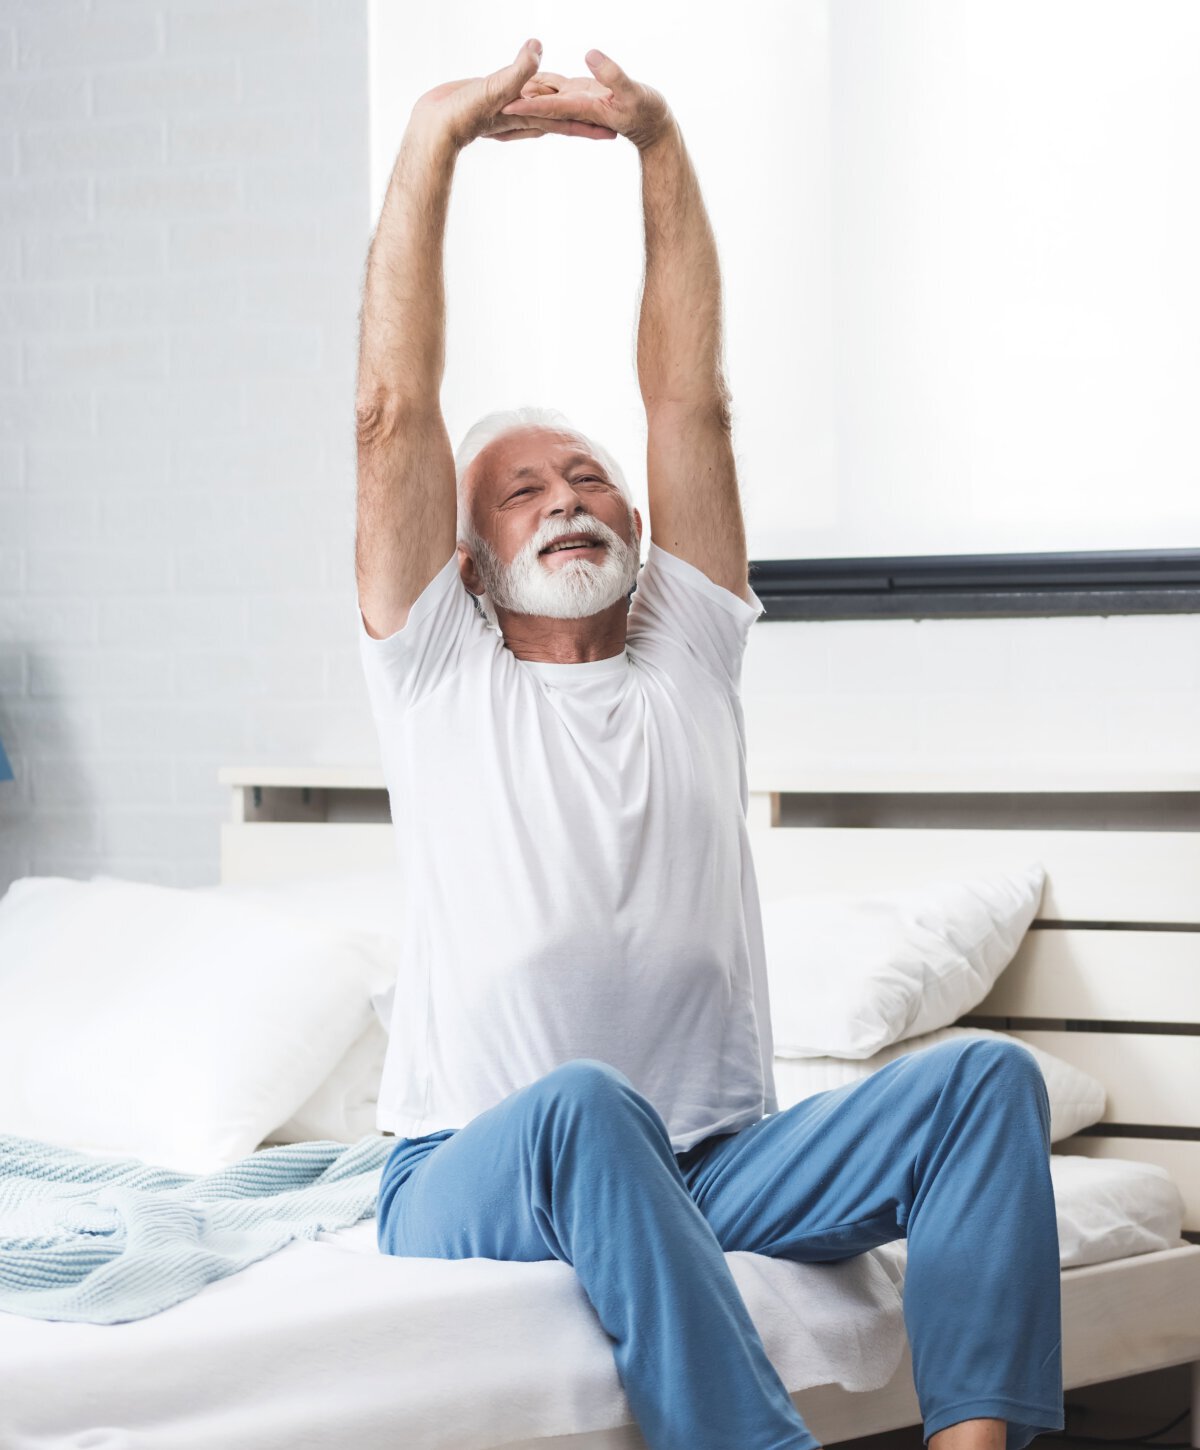 Sherman Oaks sleep therapy patient model stretching on a bed